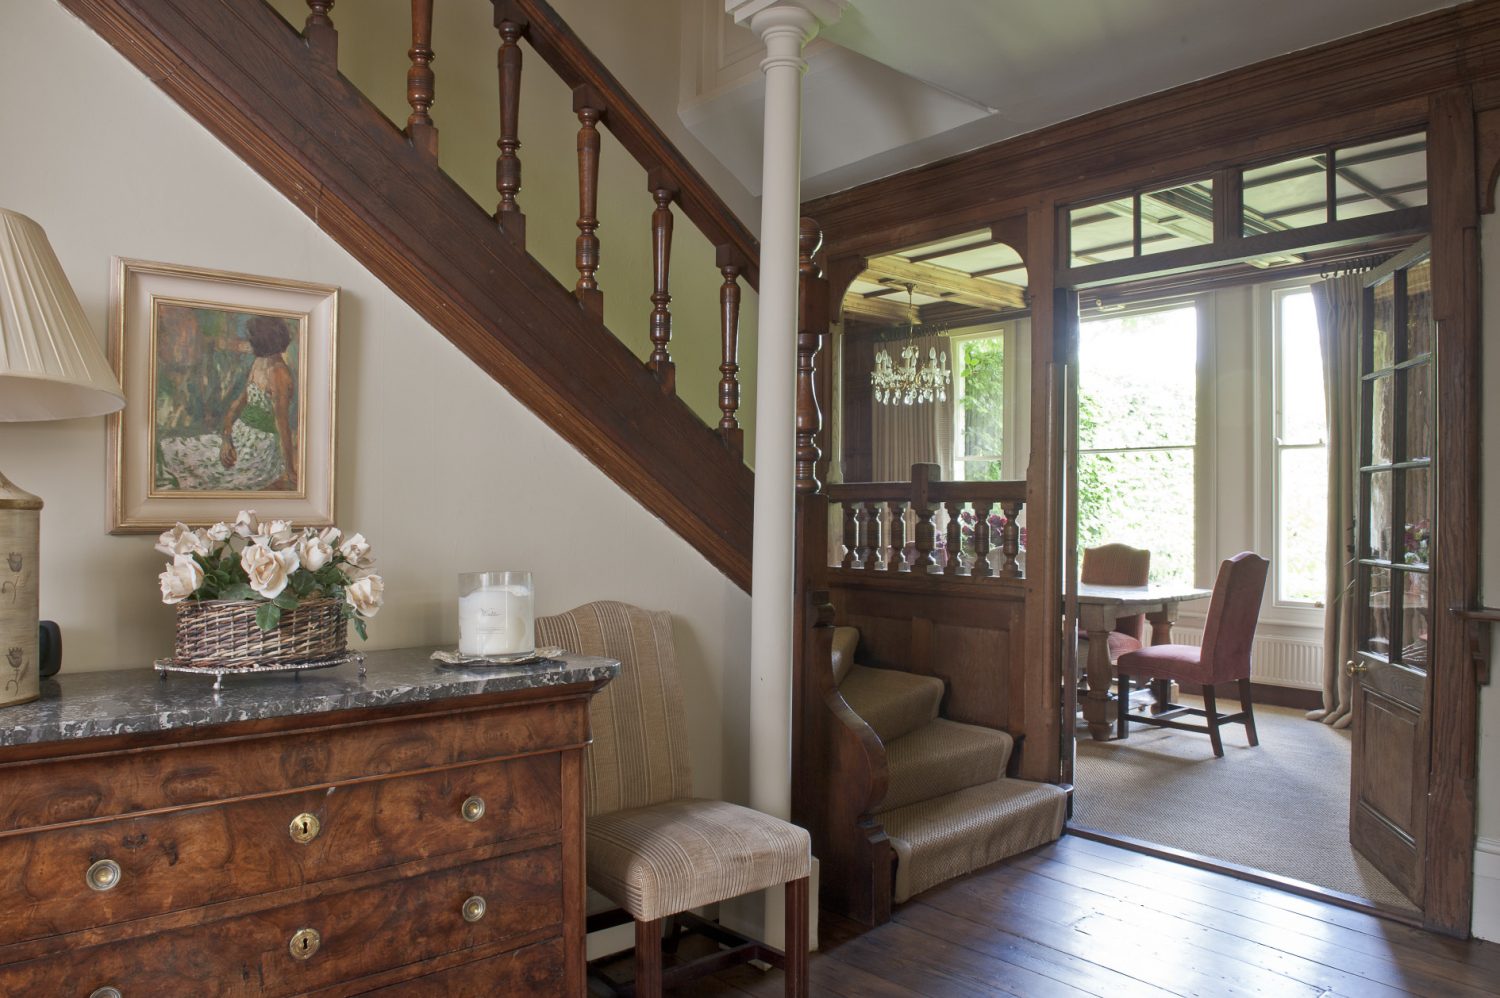 The stately windows allow light to flood into this room illuminating the wood-panelled walls